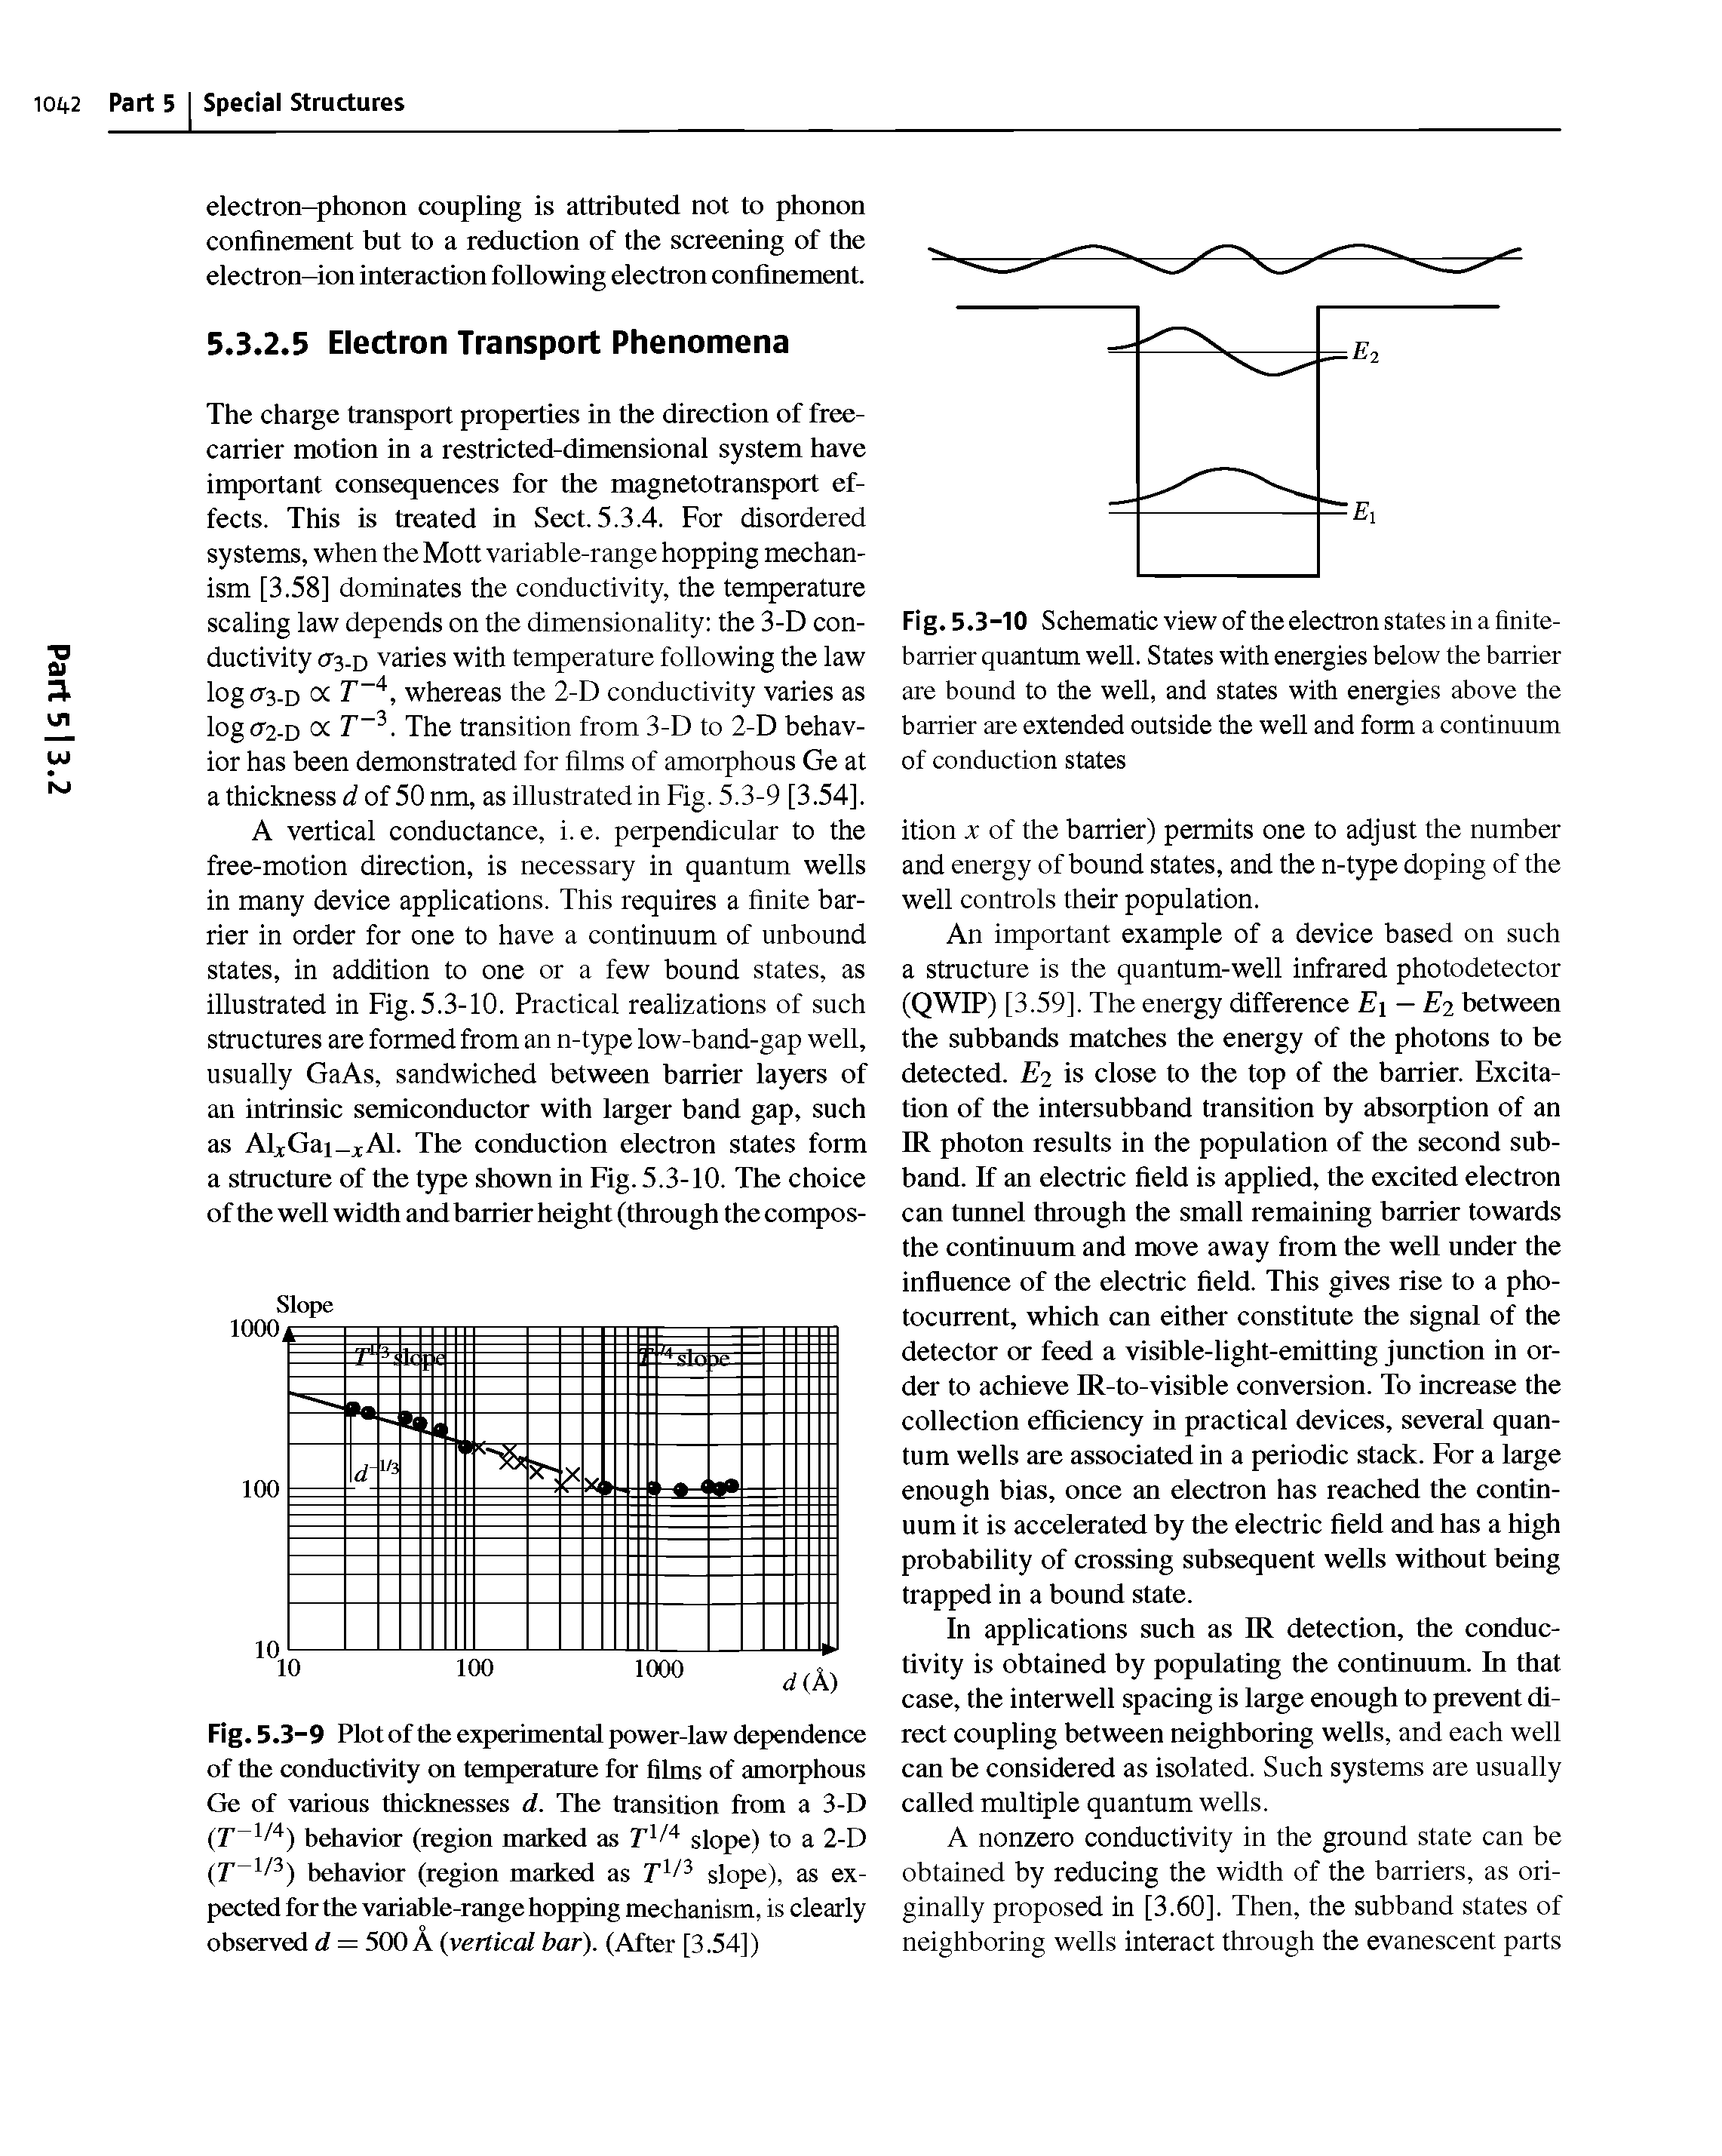 Fig. 5.3-10 Schematic view of the electron states in a finite-barrier quantum well. States with energies below the barrier are bound to the well, and states with energies above the barrier are extended outside the well and form a continuum of conduction states...